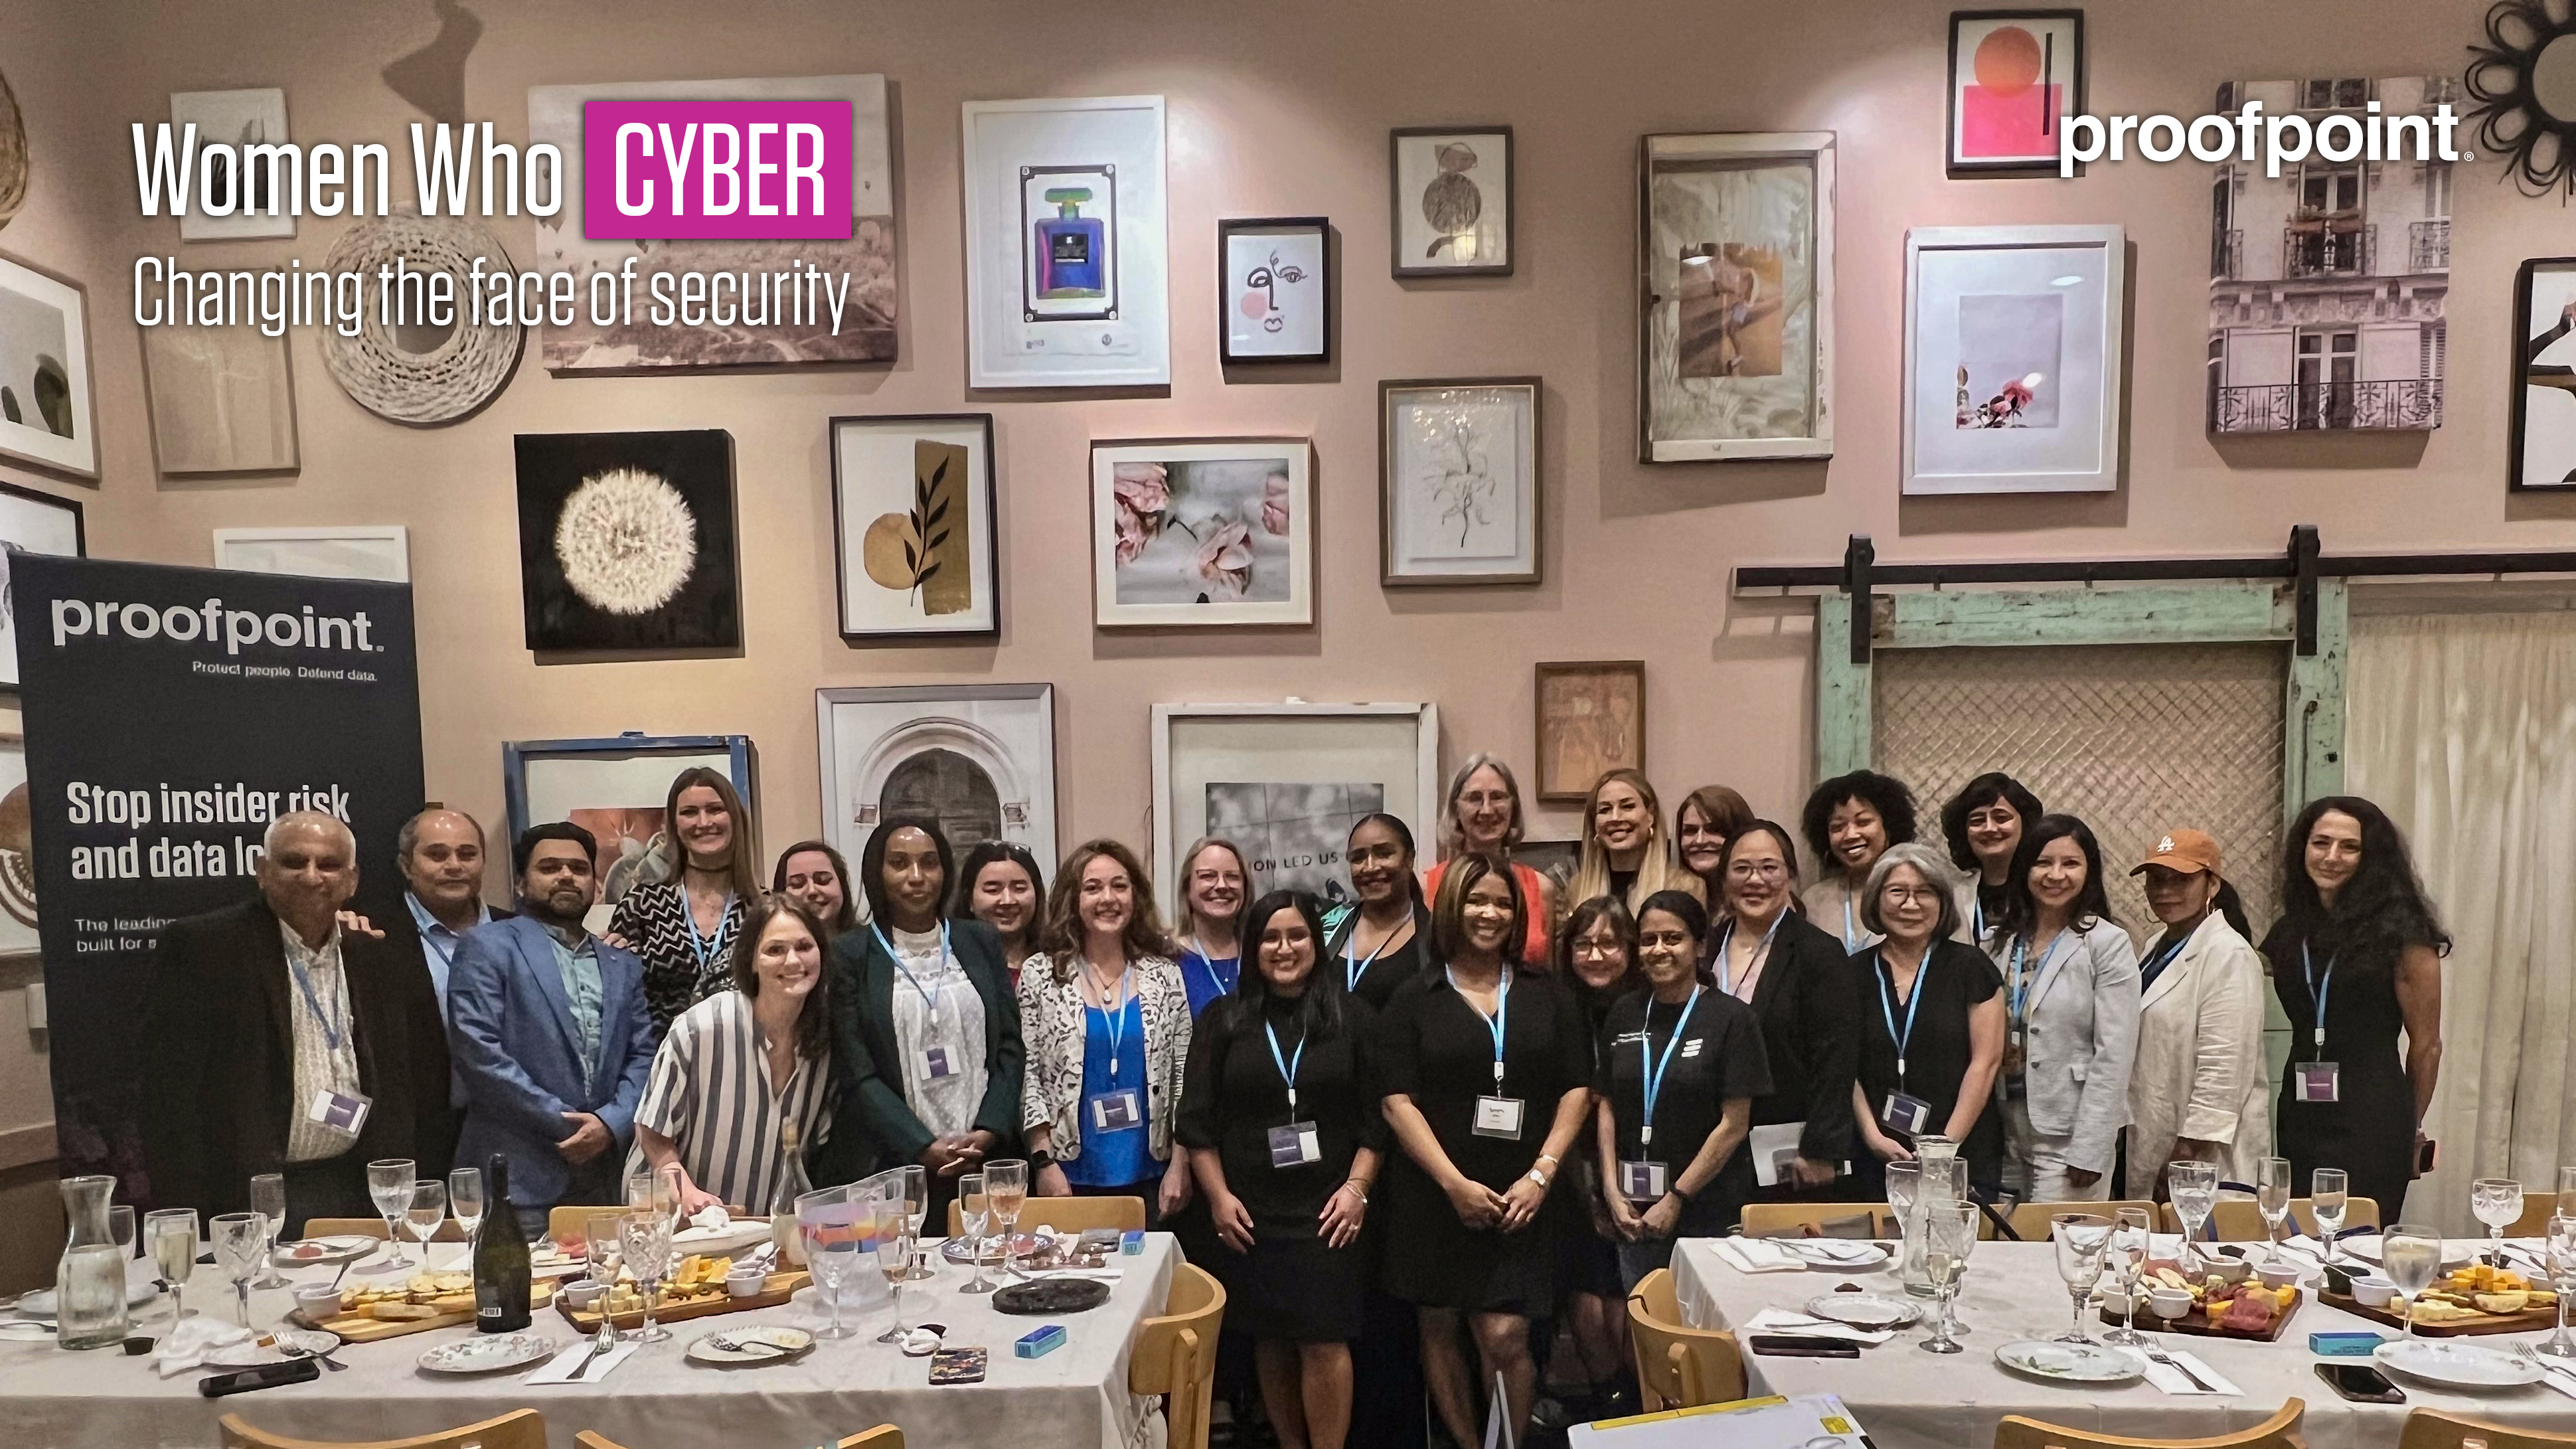 Attendees at Proofpoint’s inaugural Women Who Cyber event in Frisco, Texas.